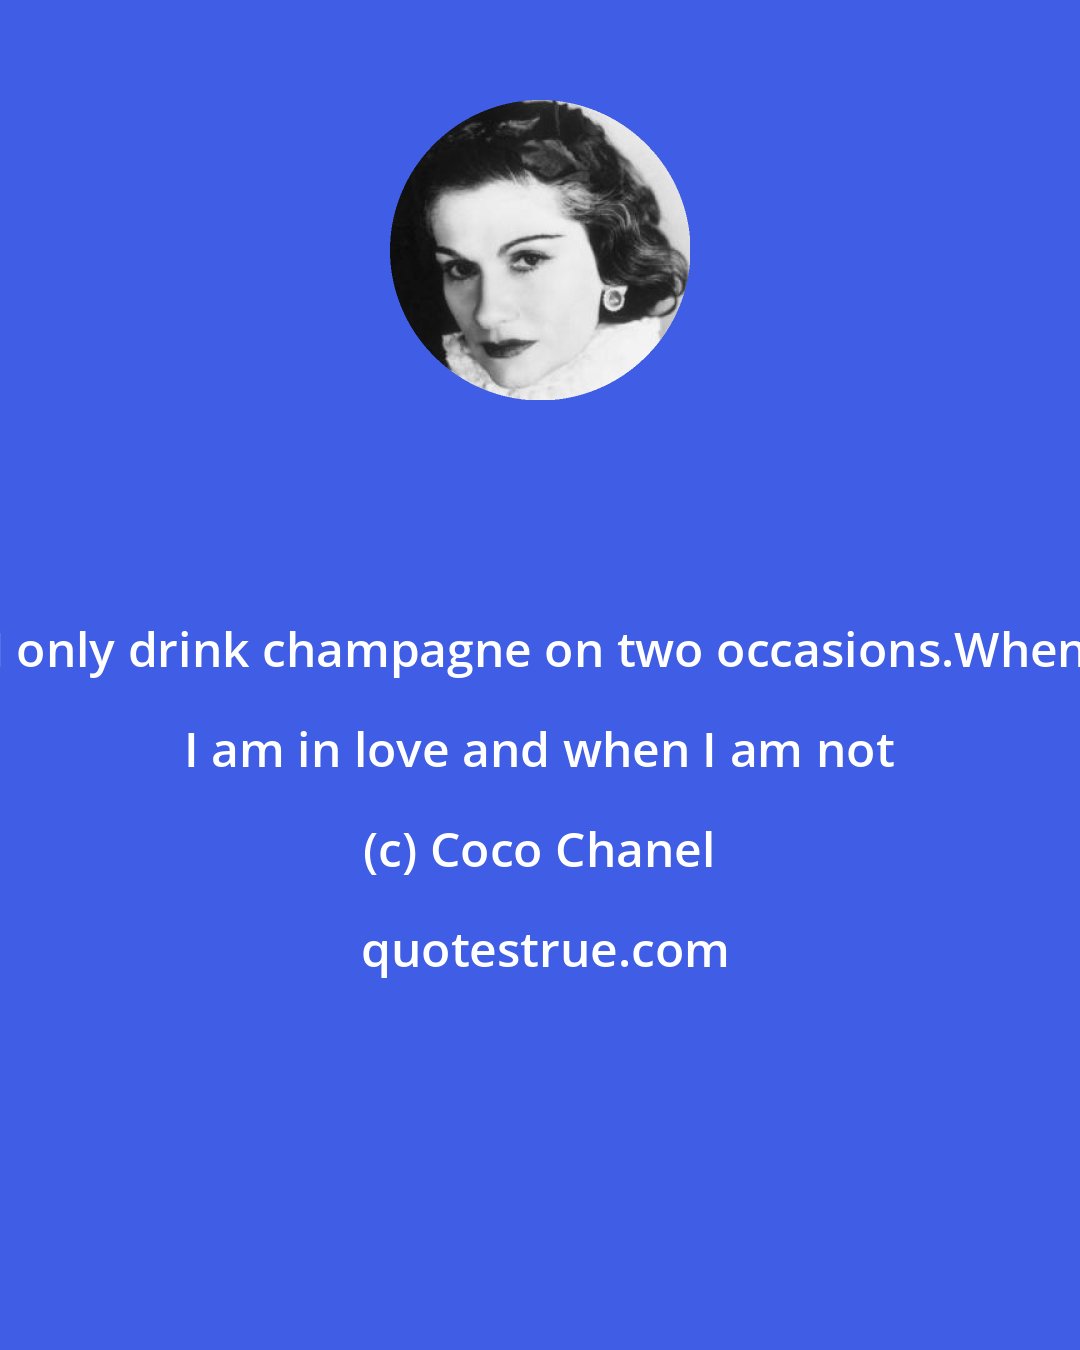 Coco Chanel: I only drink champagne on two occasions.When I am in love and when I am not